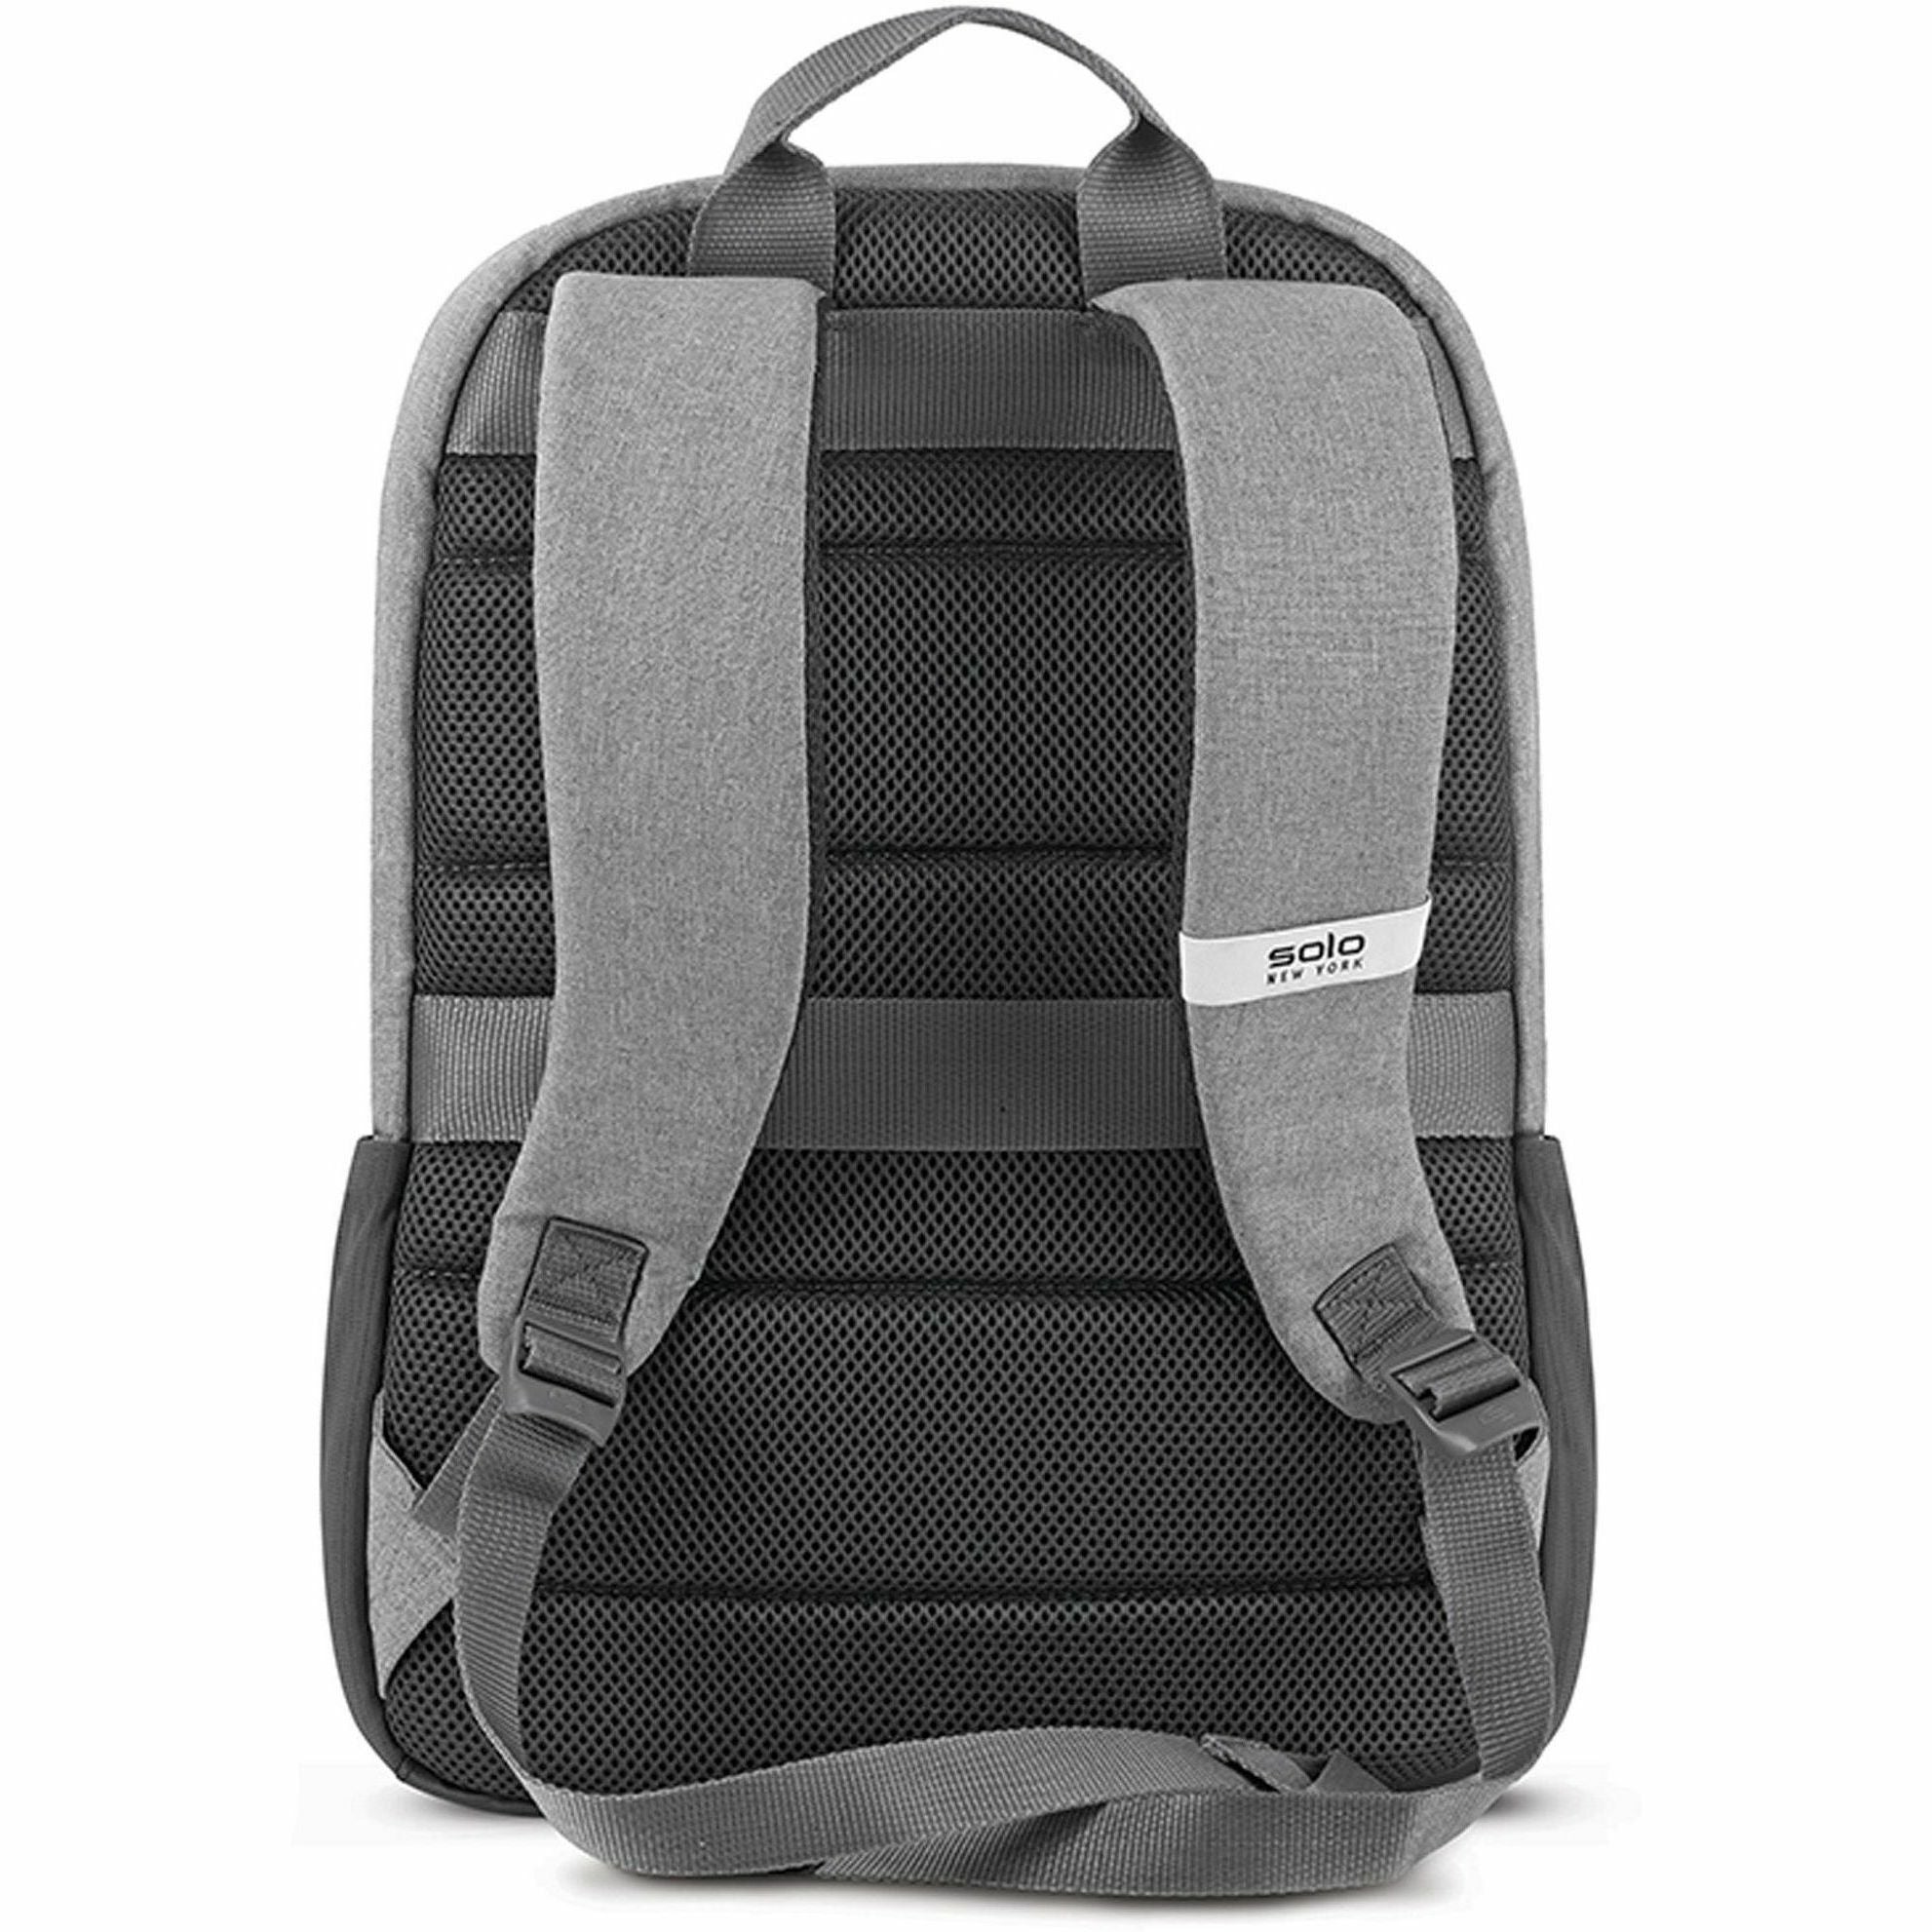 solo-recover-carrying-case-backpack-for-156-notebook-gray-bump-resistant-damage-resistant-shoulder-strap-luggage-strap-handle-148-height-x-113-width-x-7-depth-1-each_uslubn76110 - 3